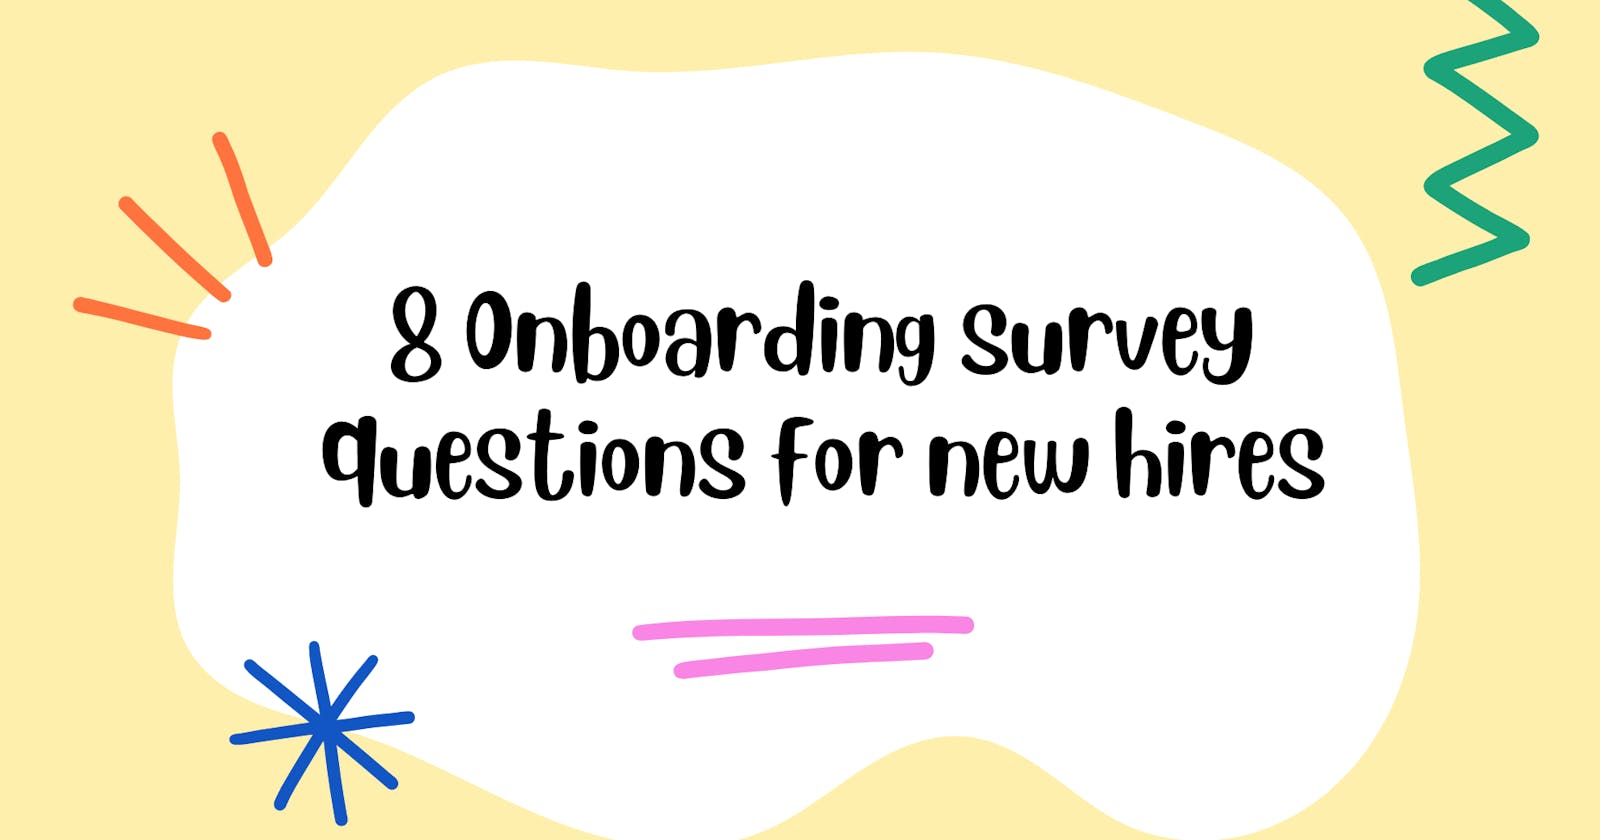 8 Onboarding survey questions for new hires